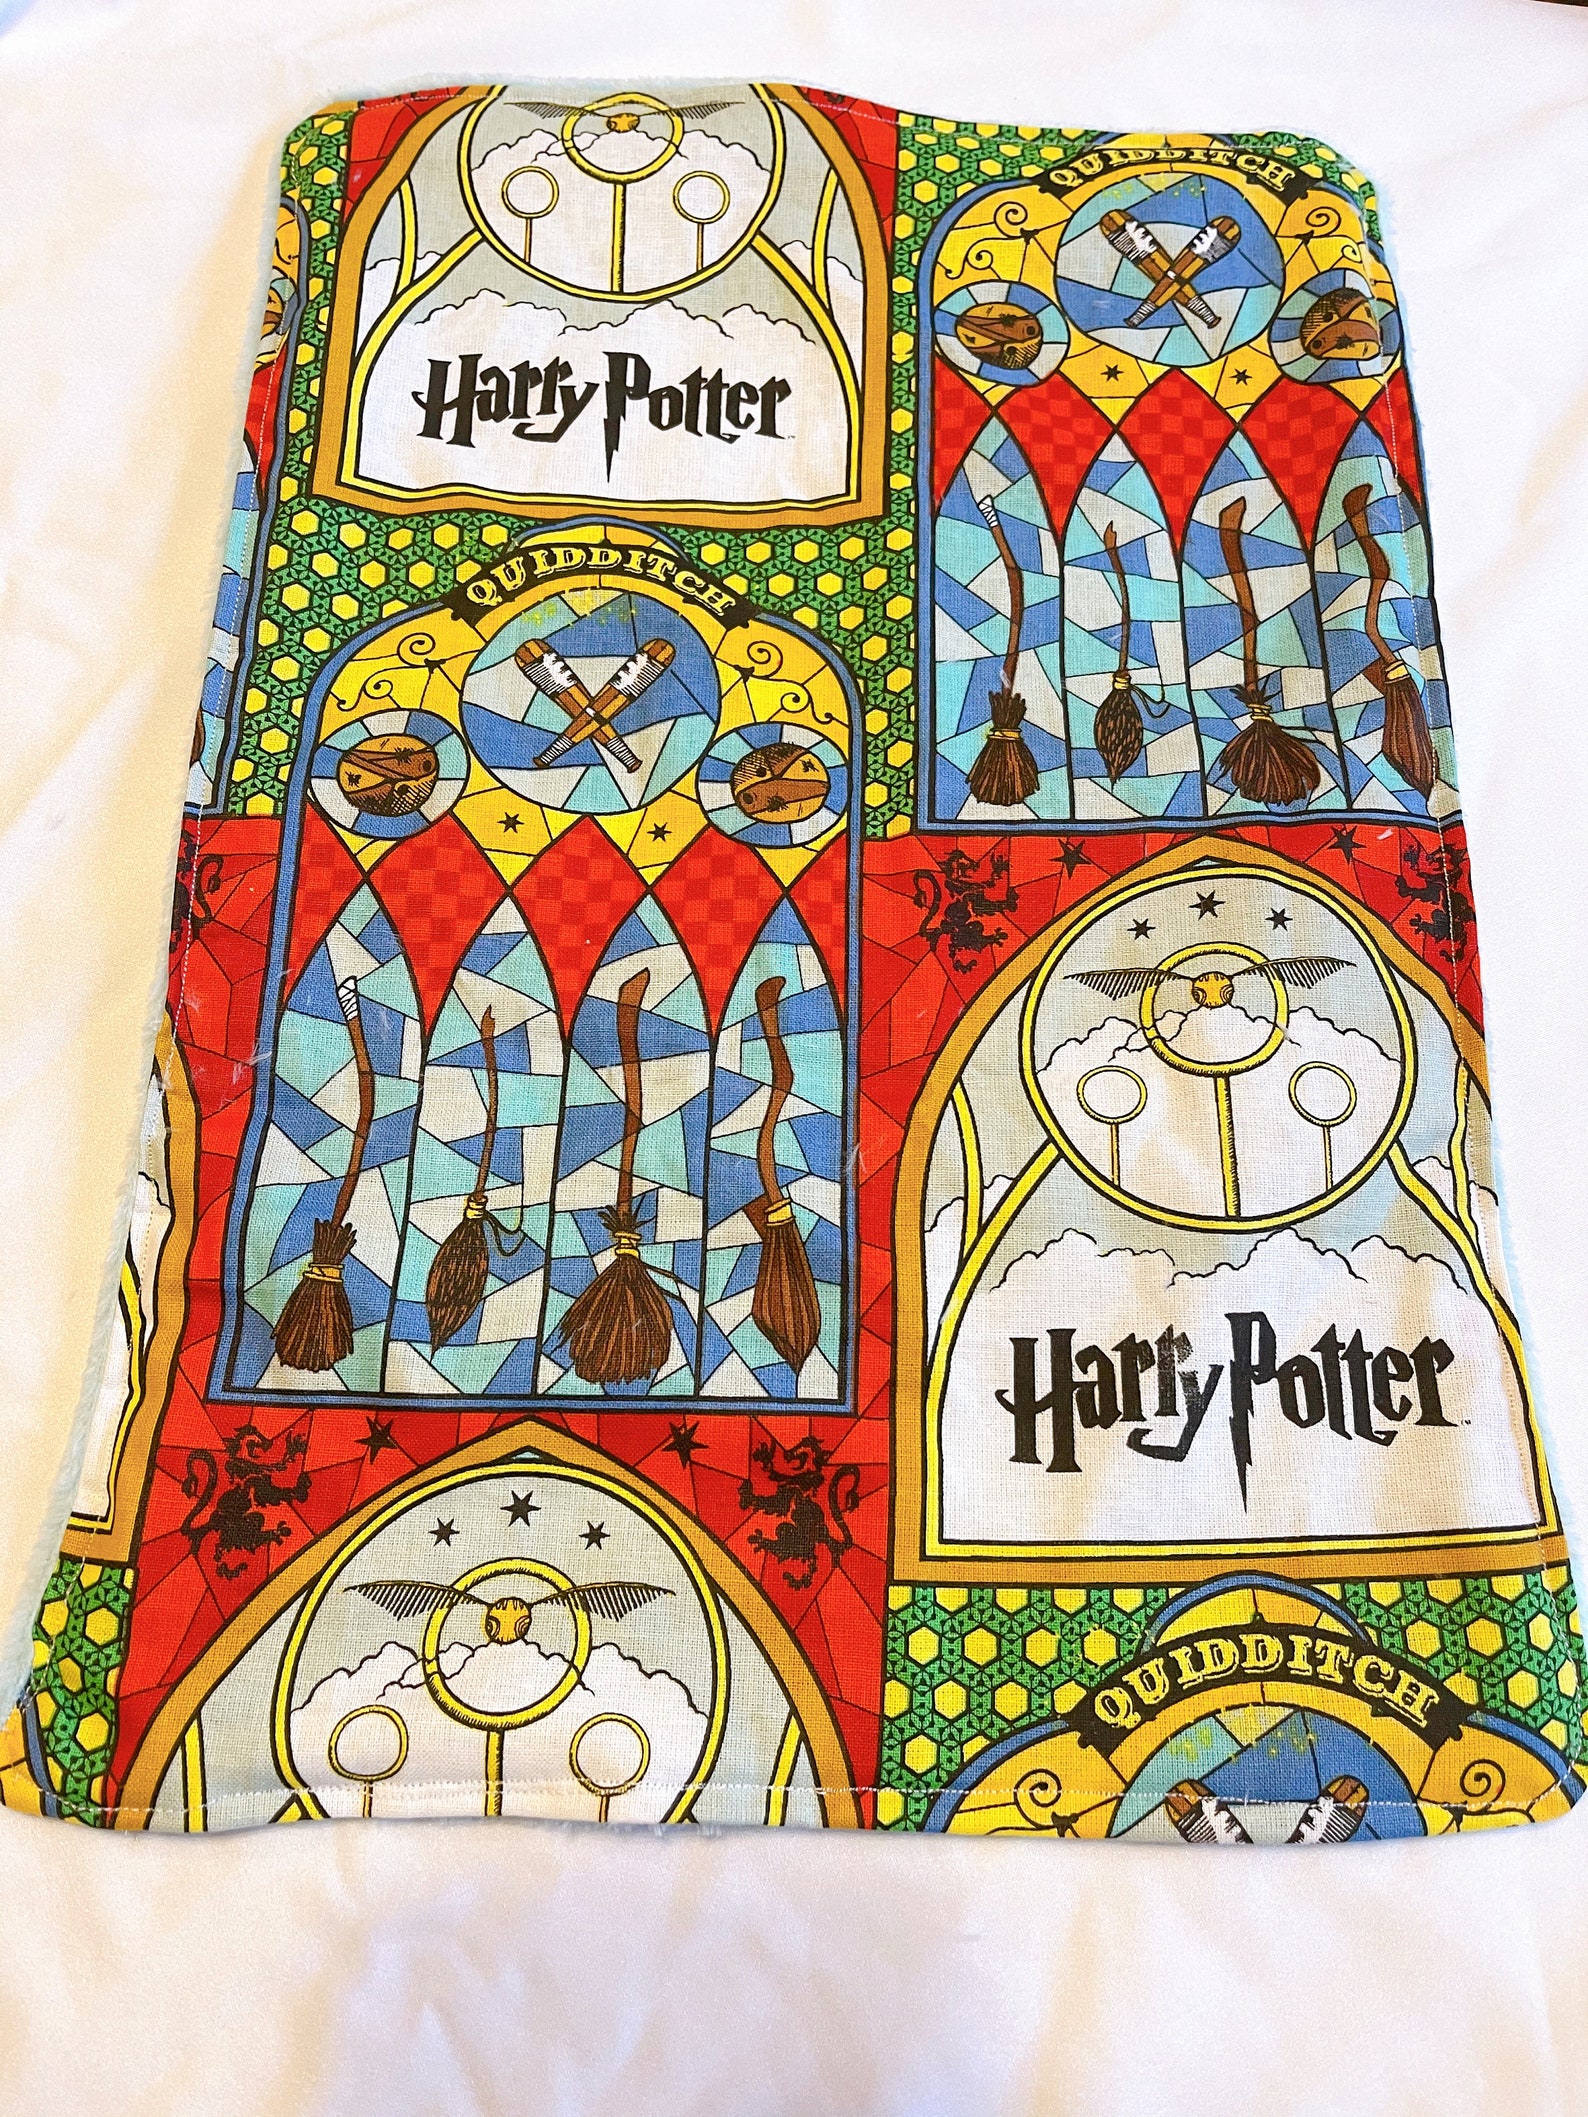 Harry Potter Burp Cloth Made with Licensed Harry Potter Fabric | Etsy